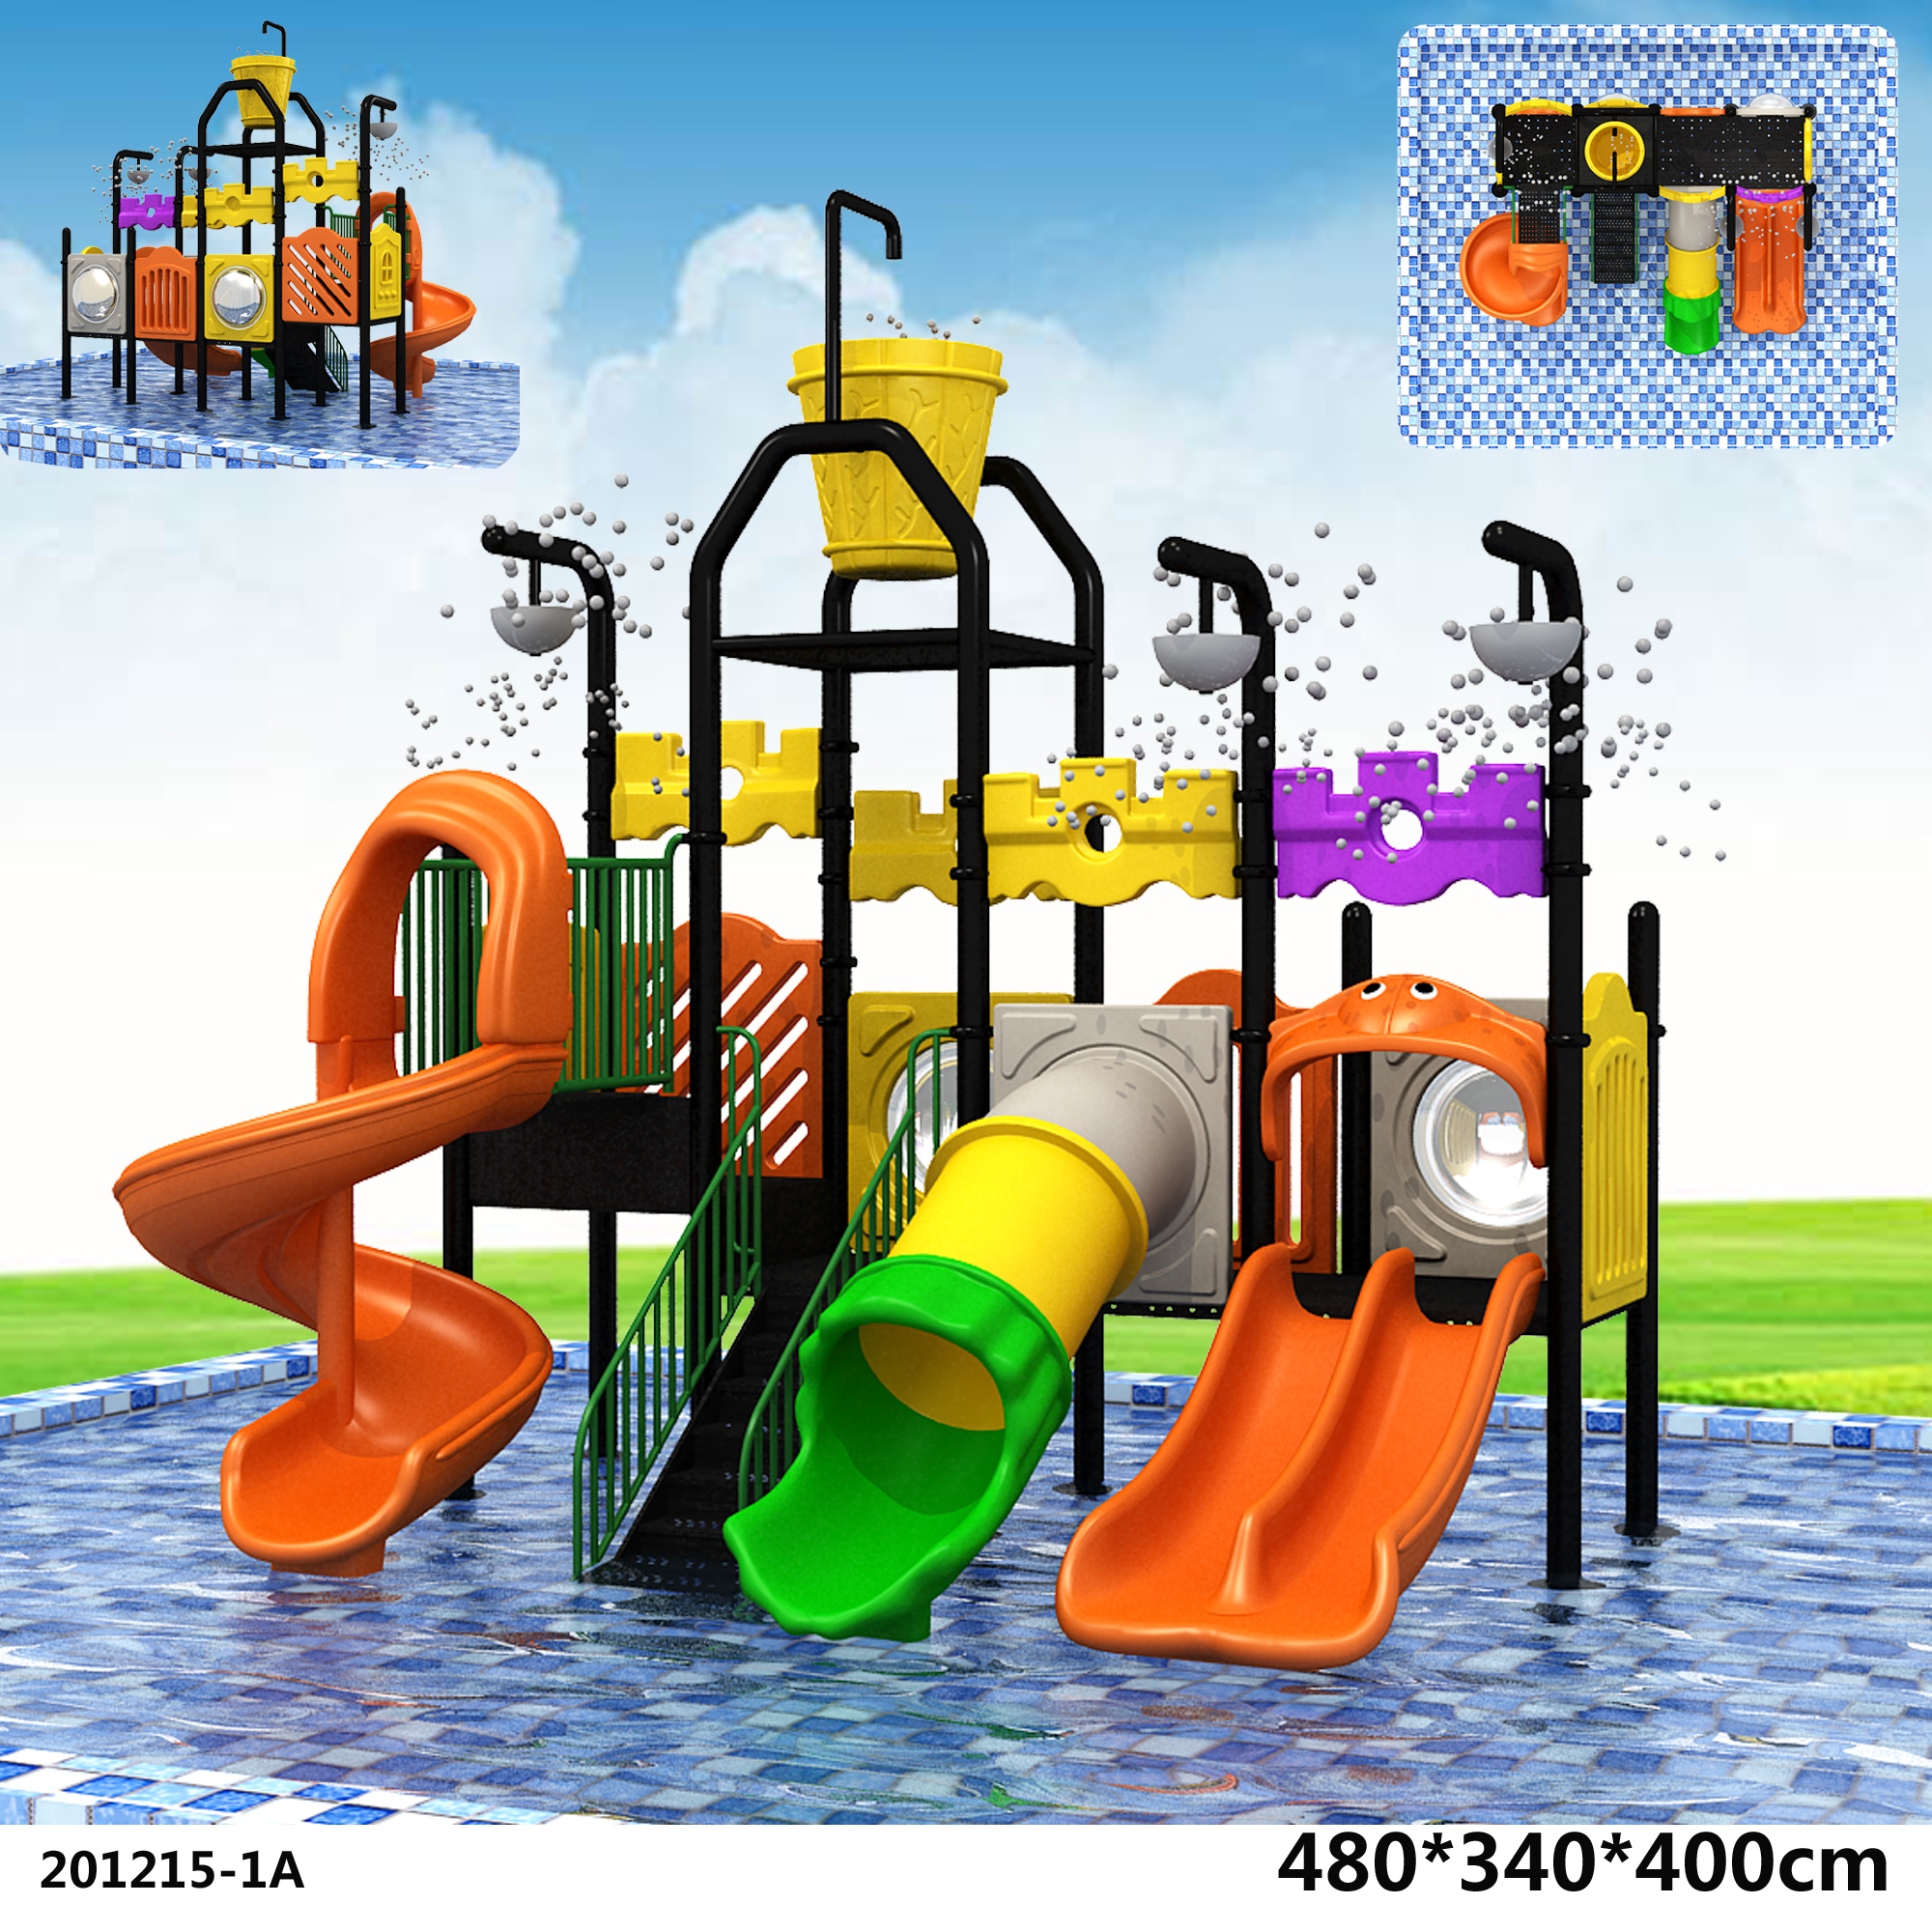 What are four things to consider when planning an outdoor water playground